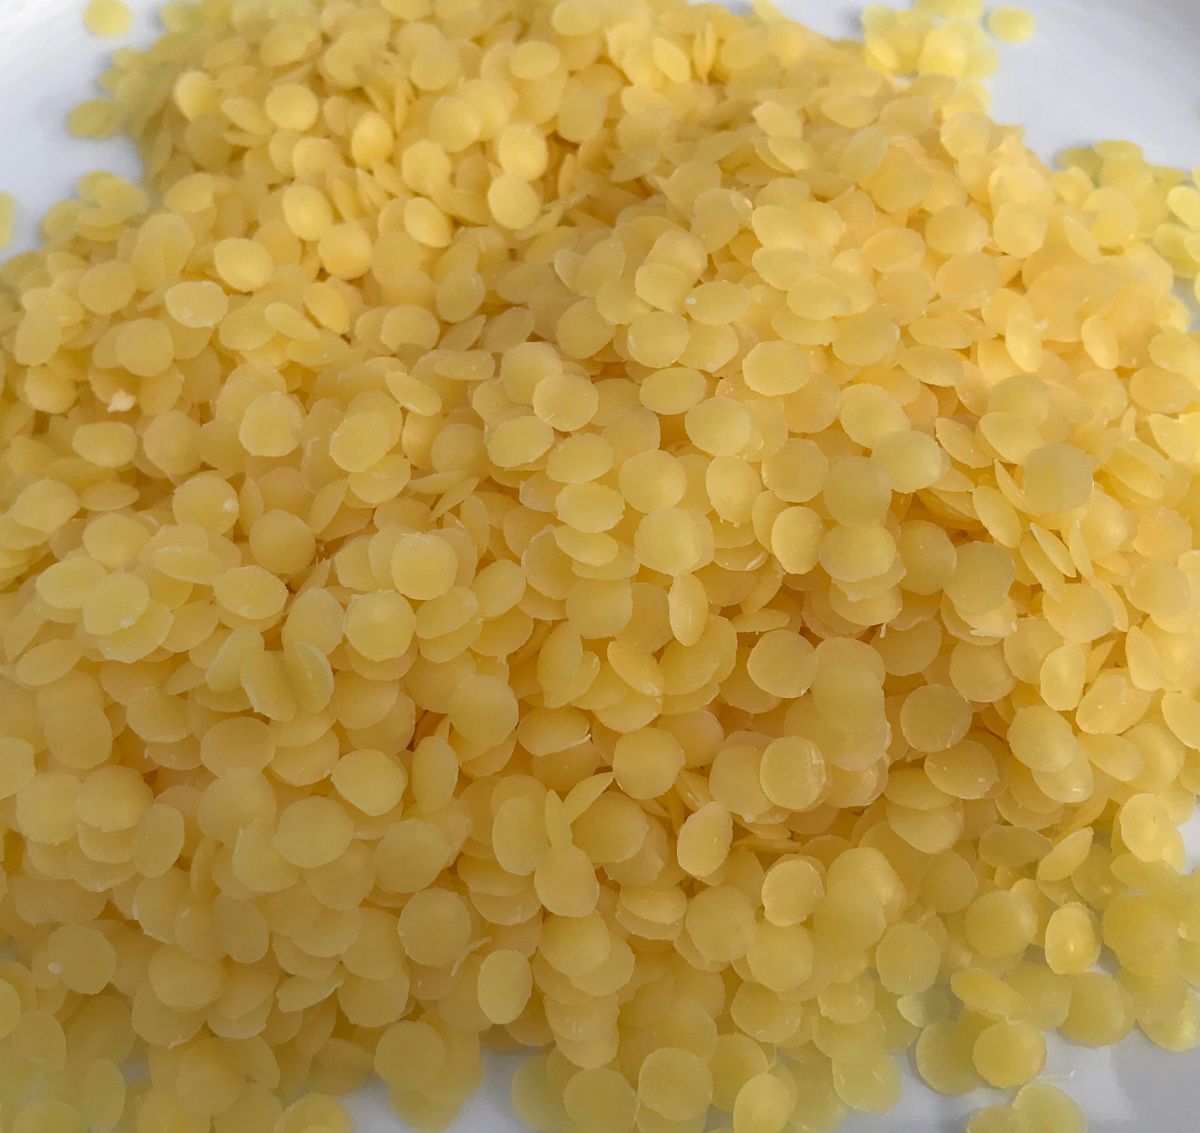 TooGet Pure Yellow Beeswax Pellets, Natural Beeswax Beads, Beeswax  Pastilles - Premium Quality, Cosmetic Grade - 14 OZ